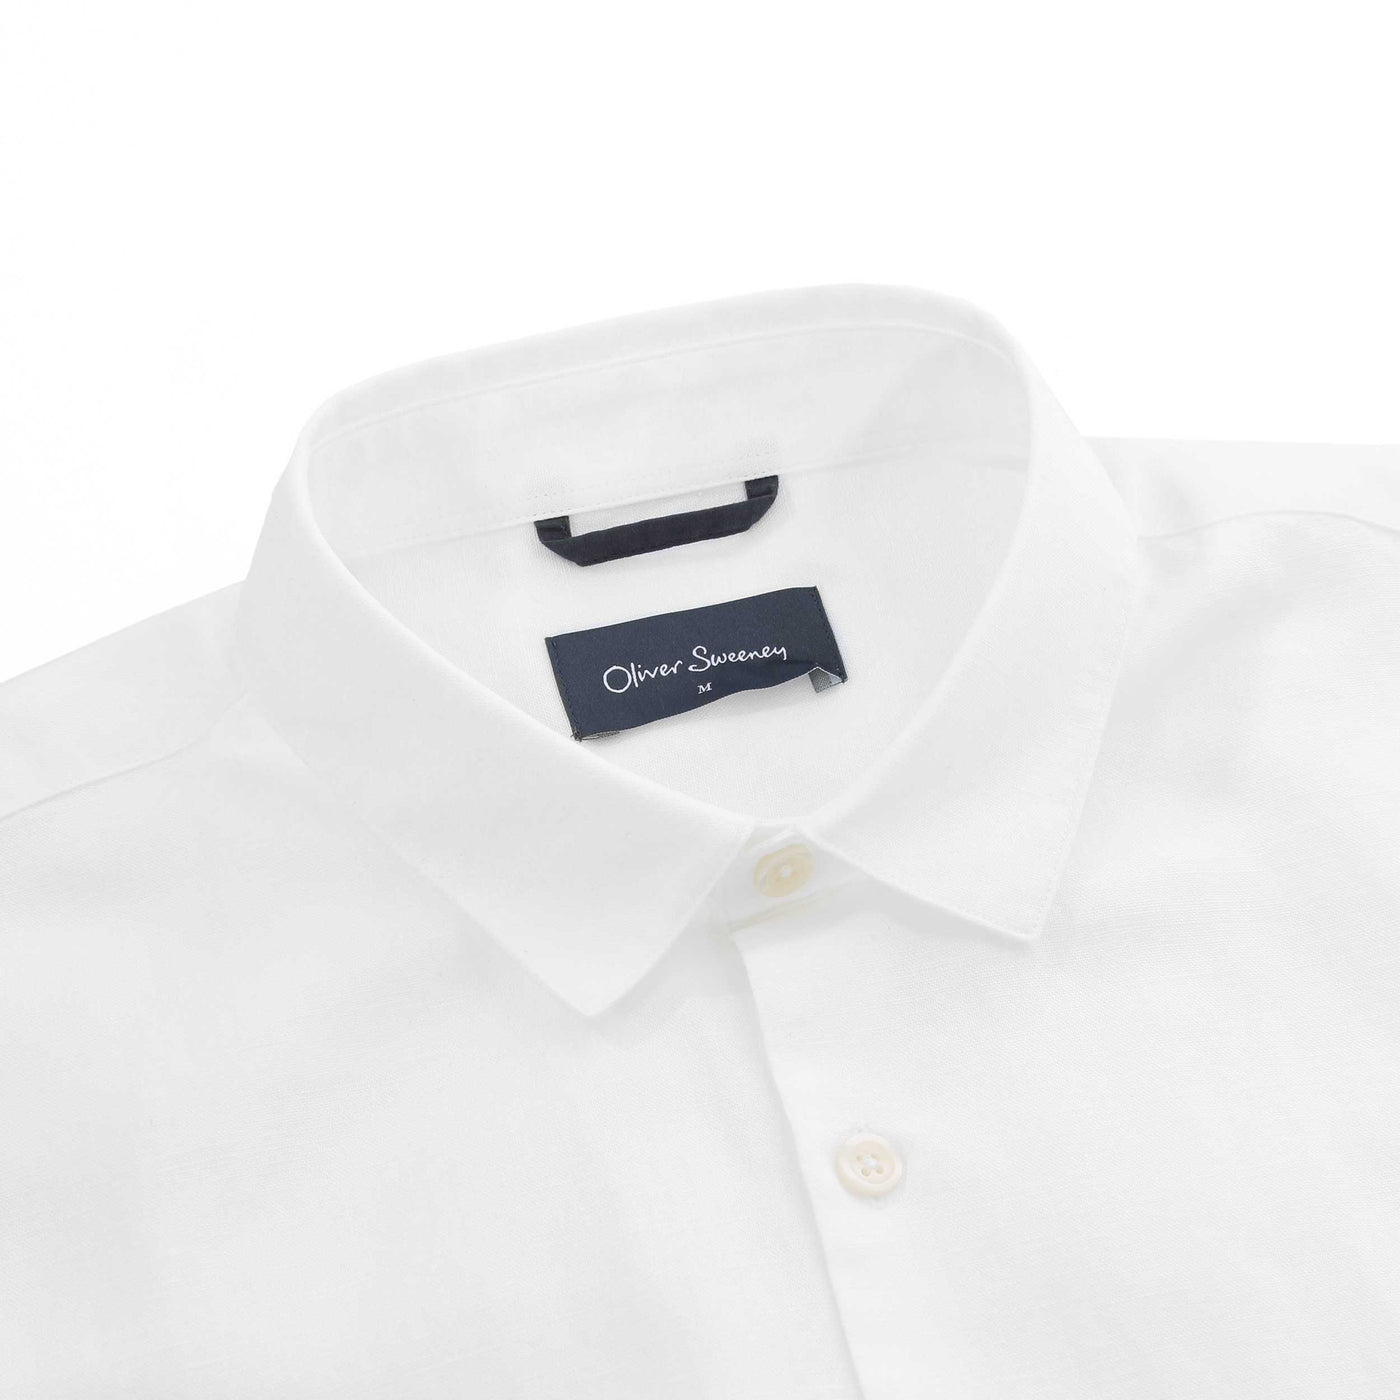 Oliver Sweeney Hawkesworth Shirt in White Collar